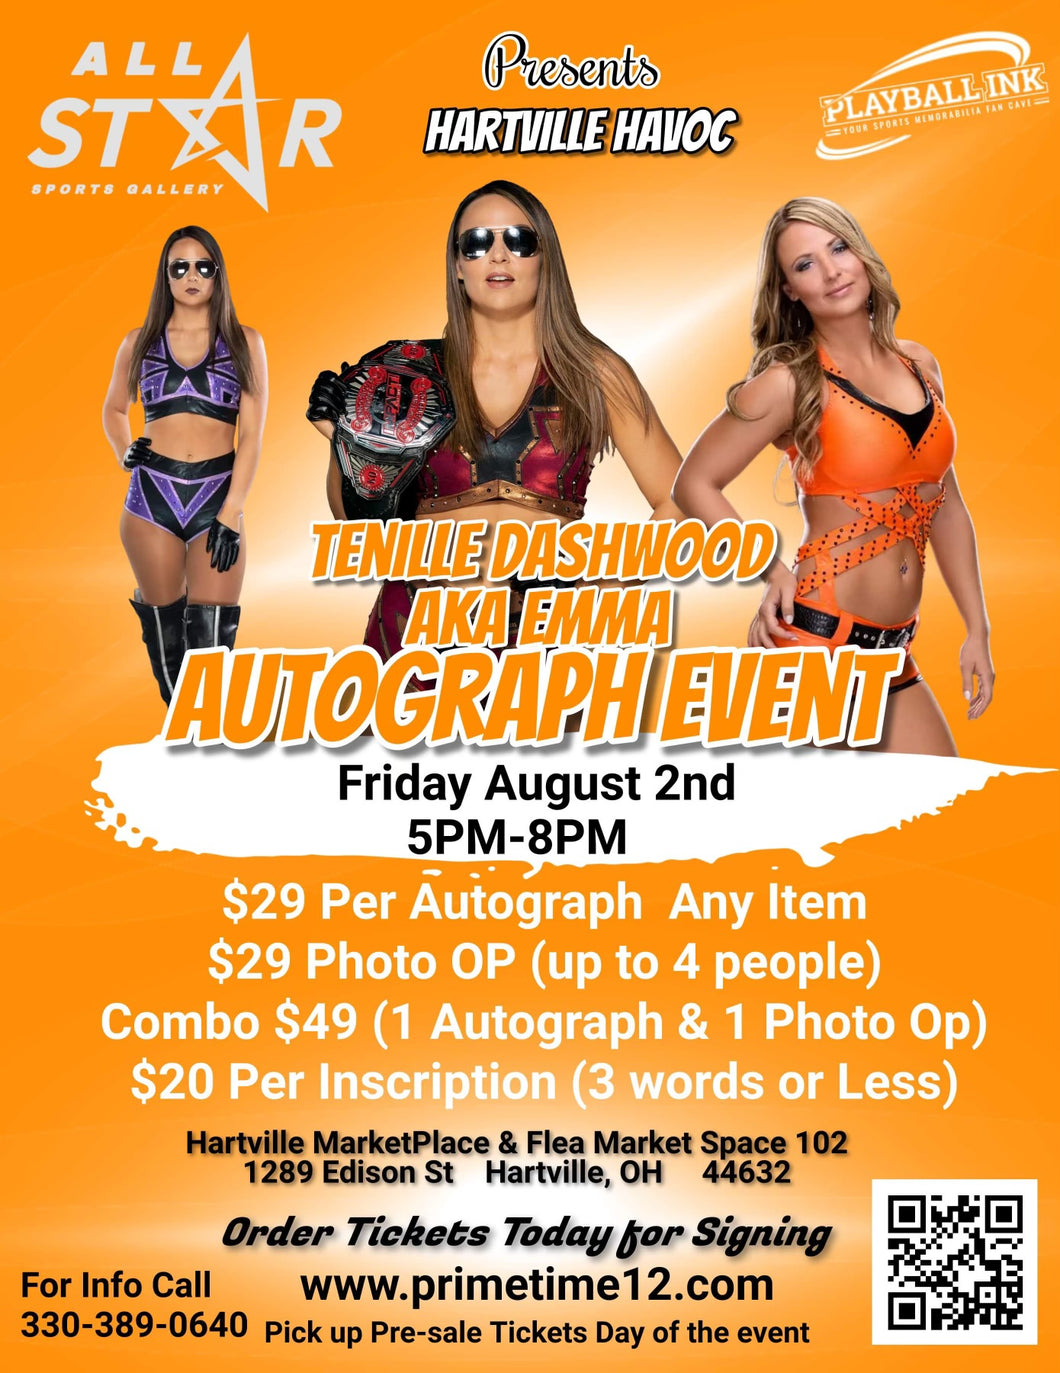 Tenille Dashwood AKA EMMA Pre-Sale ticket for autograph signing & photo op COMBO GET ANY 1 ITEM SIGNED PLUS PHOTO TAKEN WITH HER